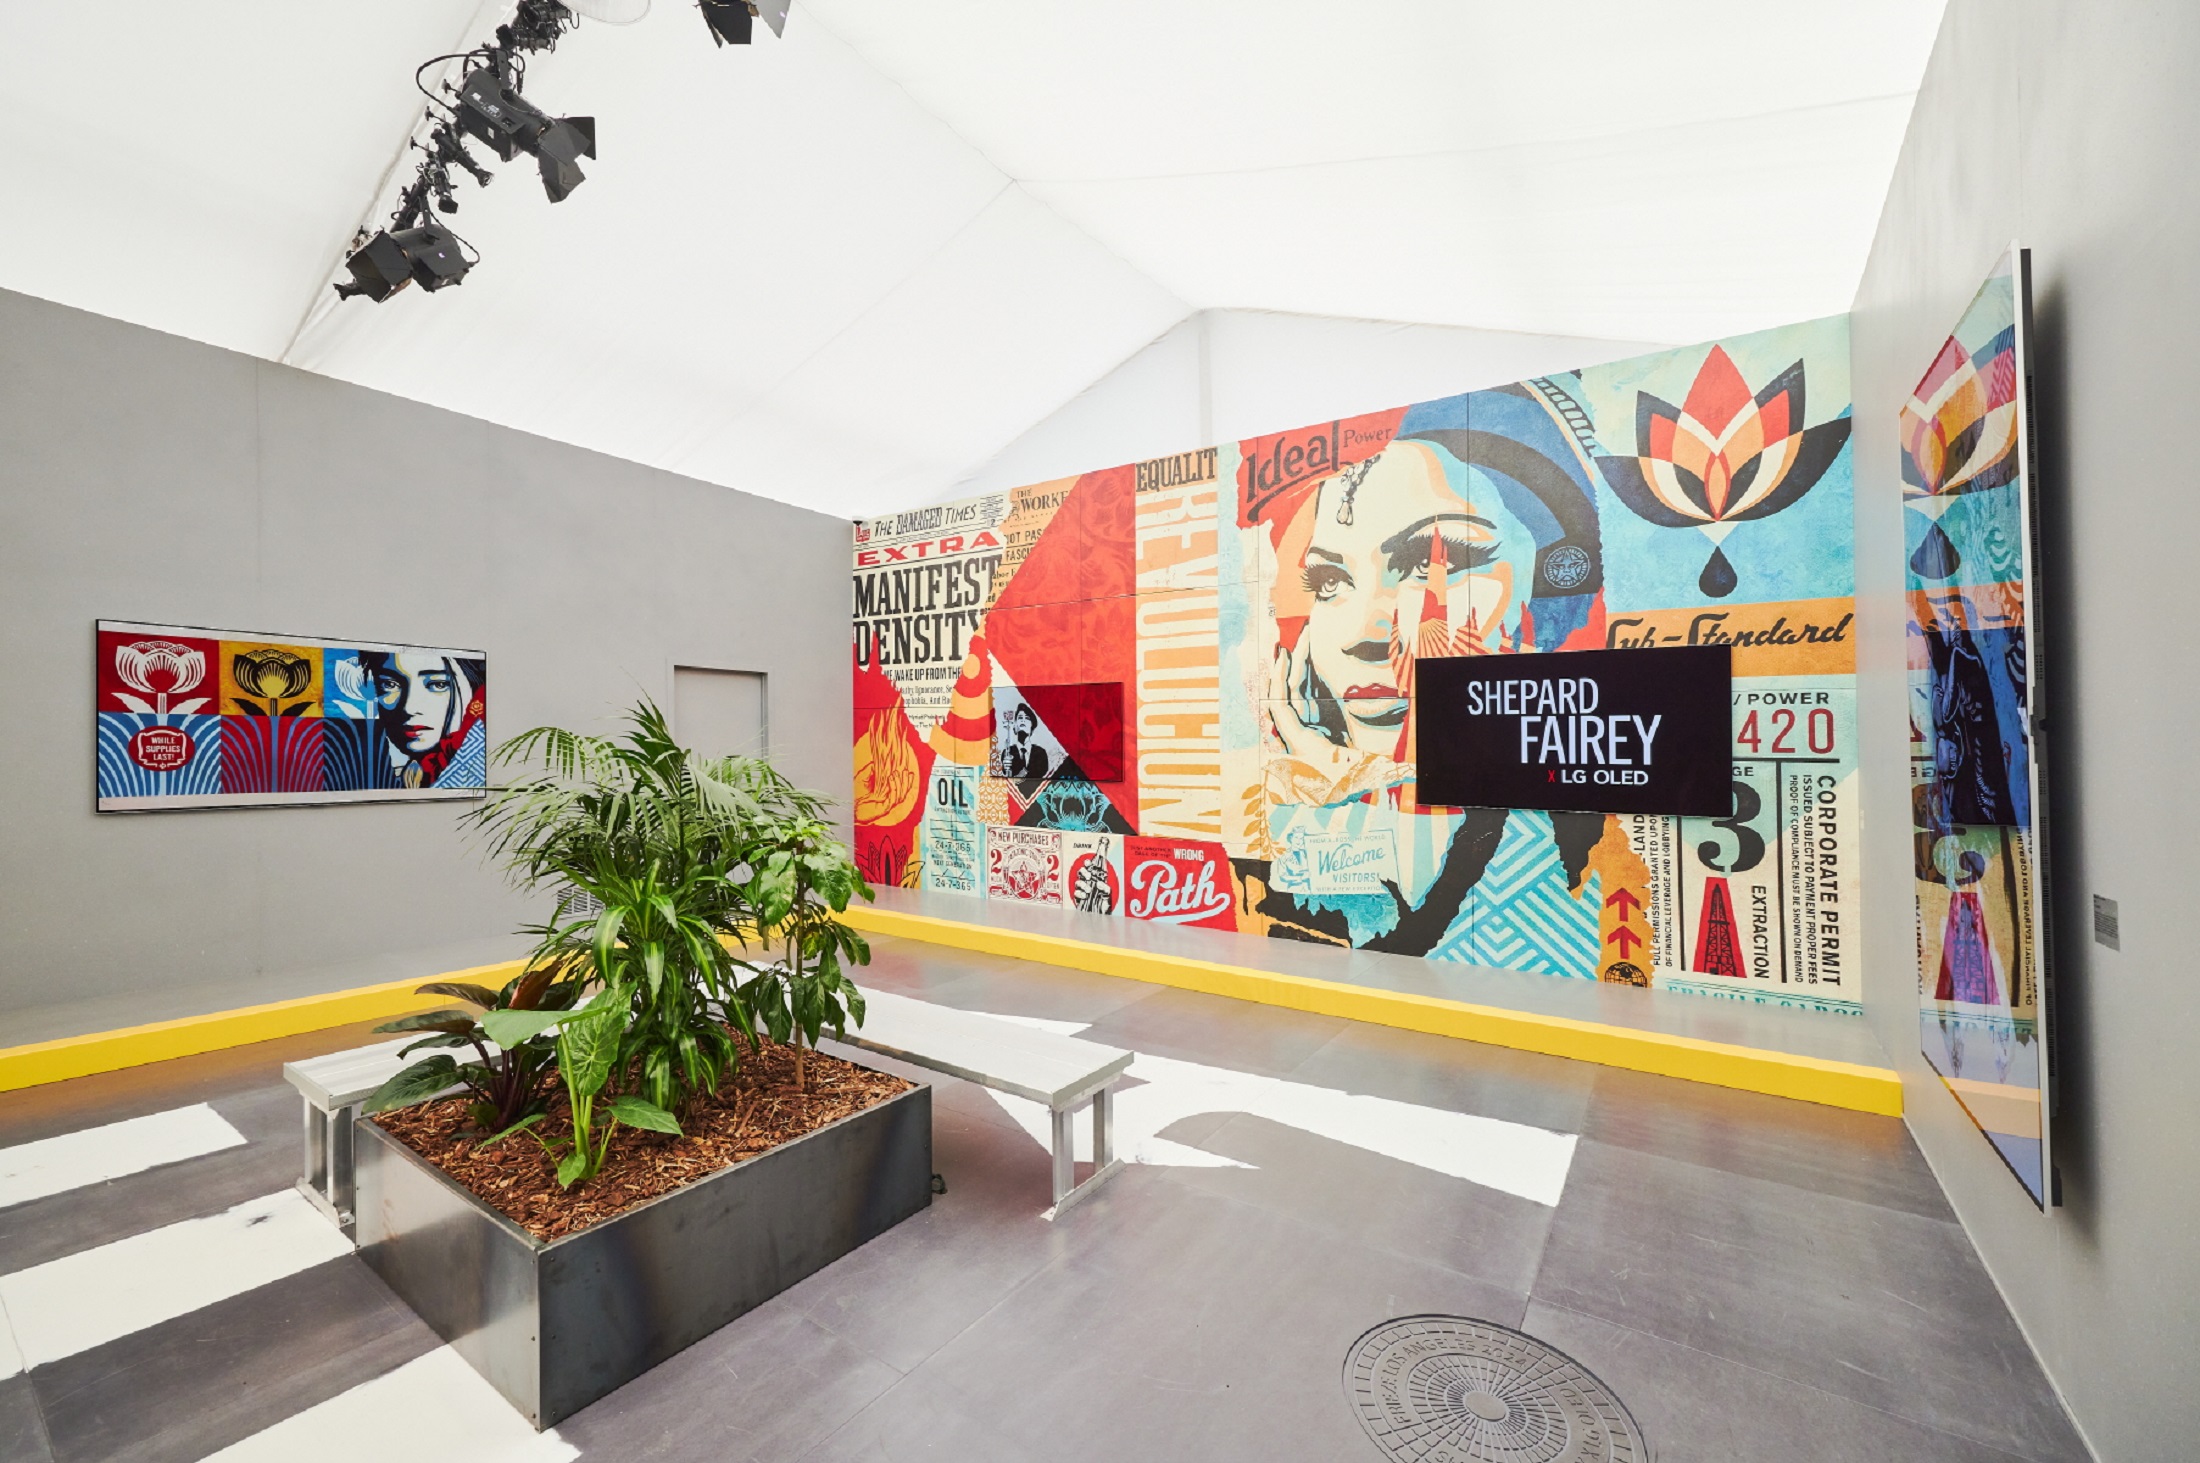 Two LG OLED TVs are positioned above a mural, with the right displaying Shephard Fairey X LG OLED and the left displaying part of the mural